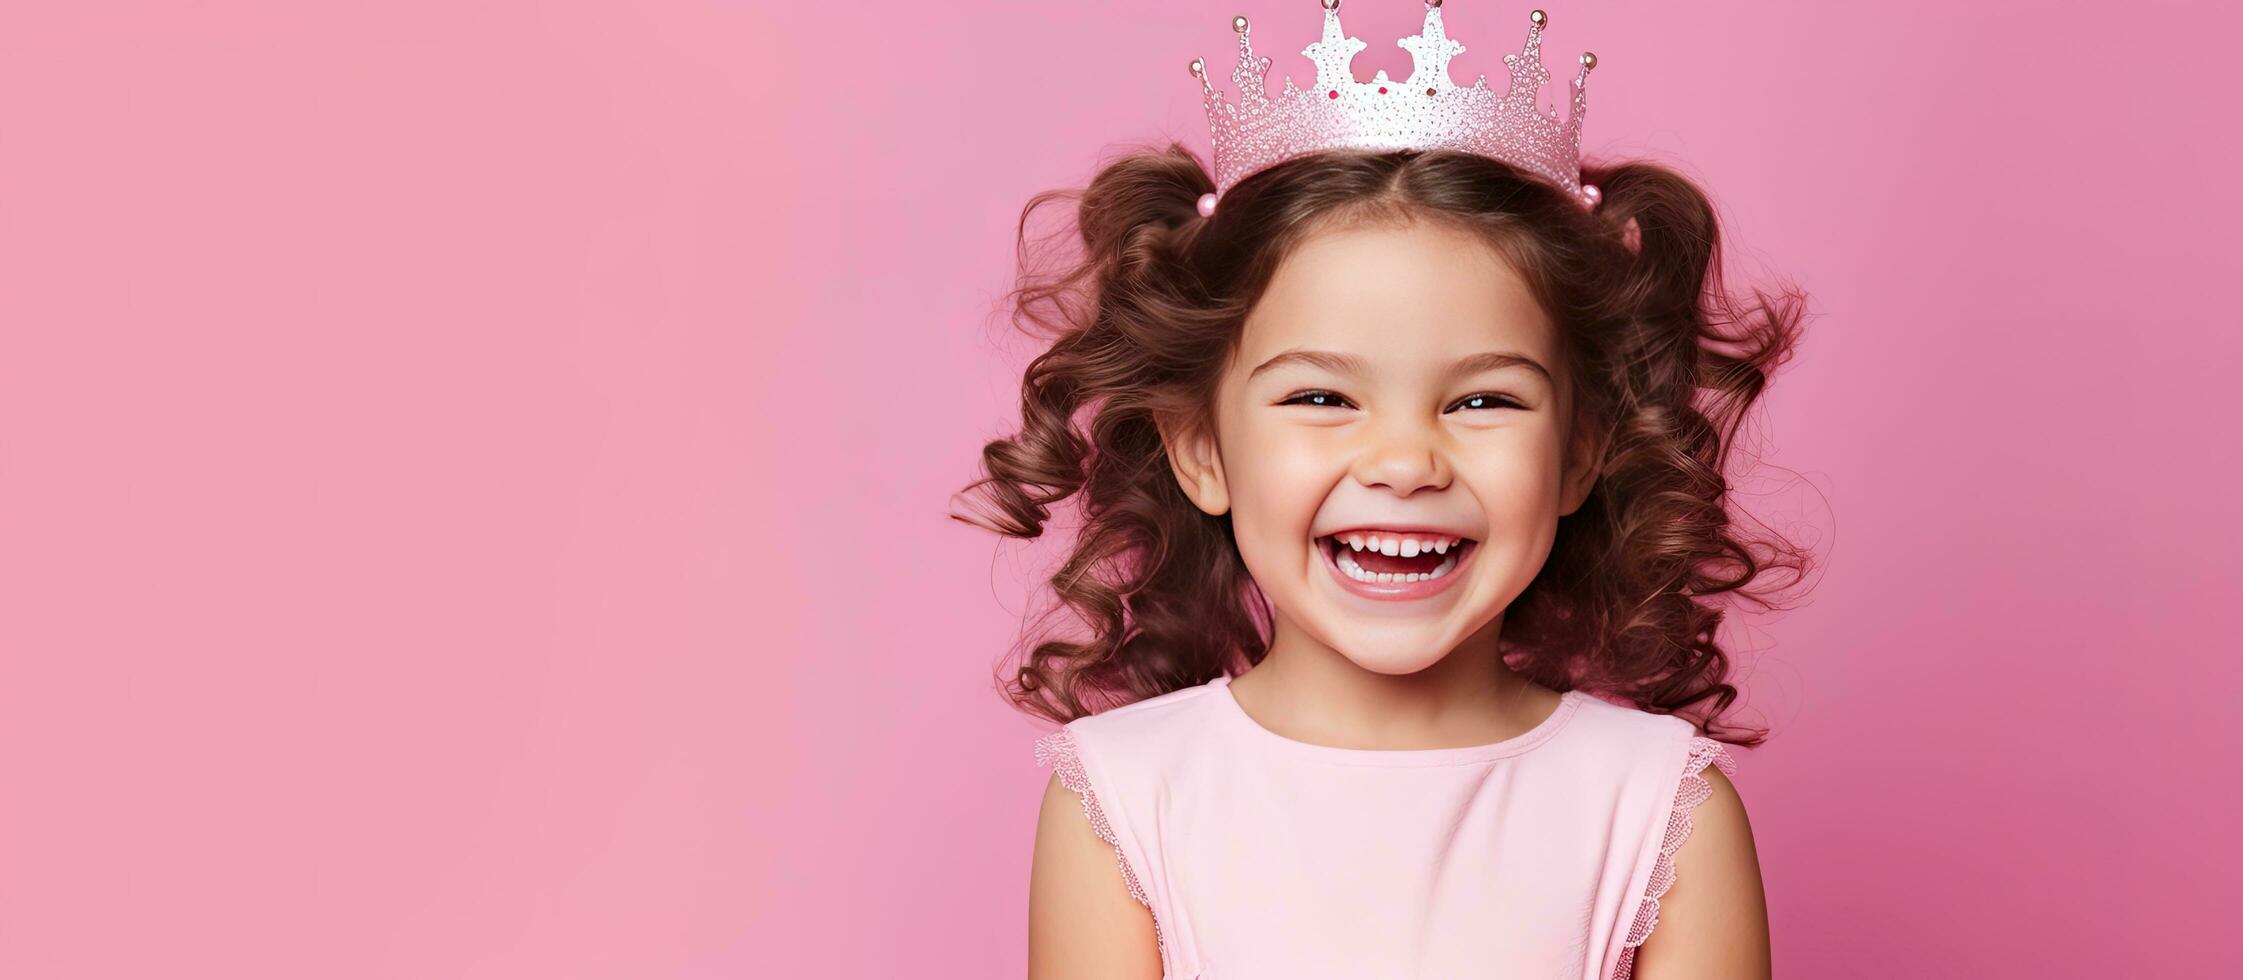 Little girl in pink princess dress posing on pink background Happy Birthday concept Copy space photo